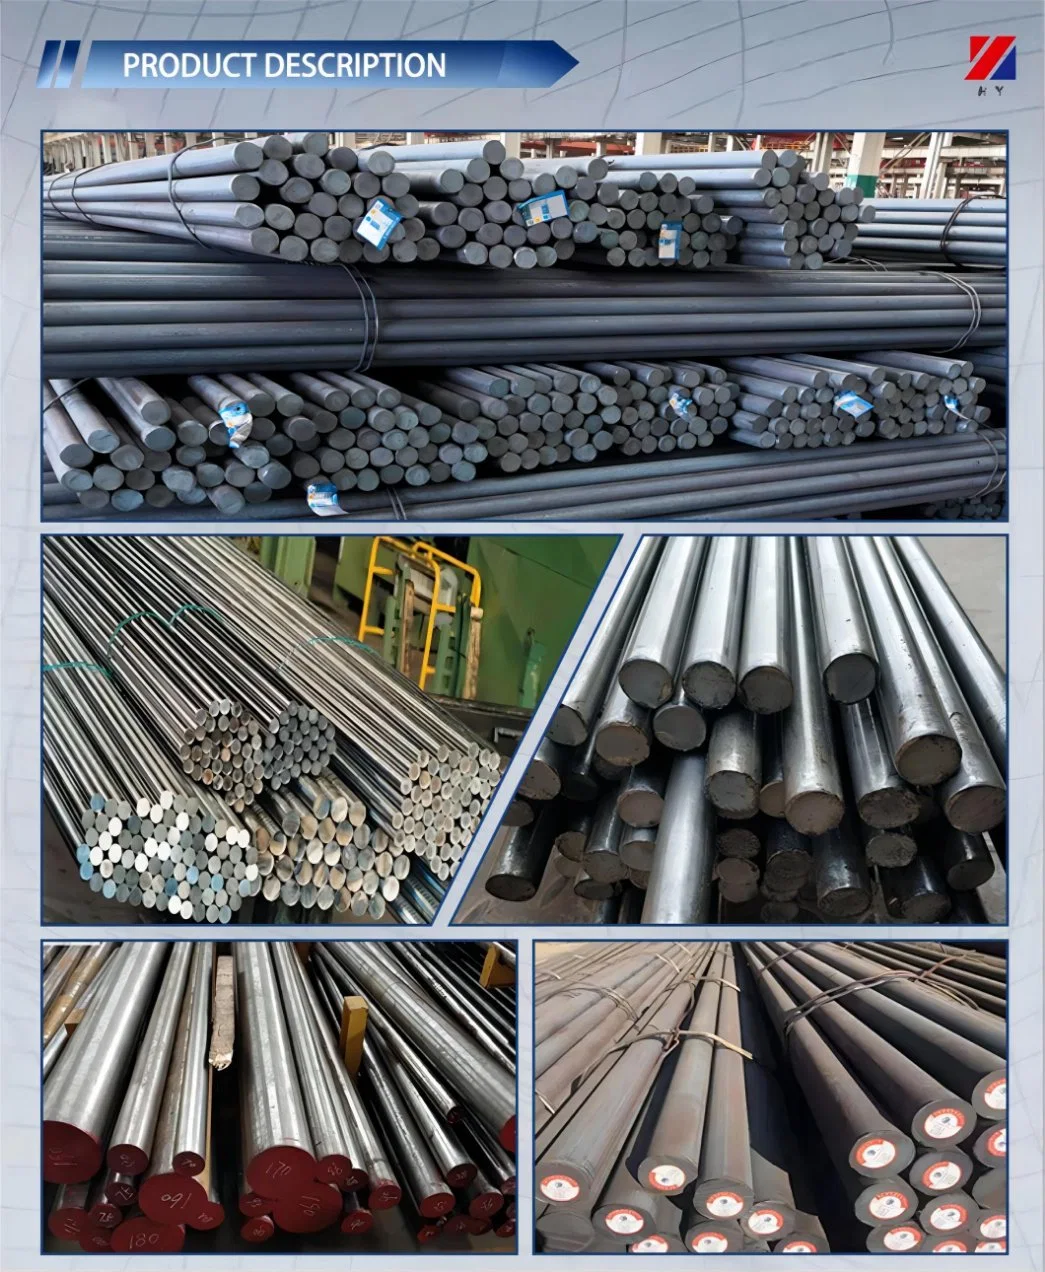 Cast Iron 1.1191/Ck45 1018 Cold Rolled Steel Hot Stick Rod C1045 High Alloy Carbon Steel Bar